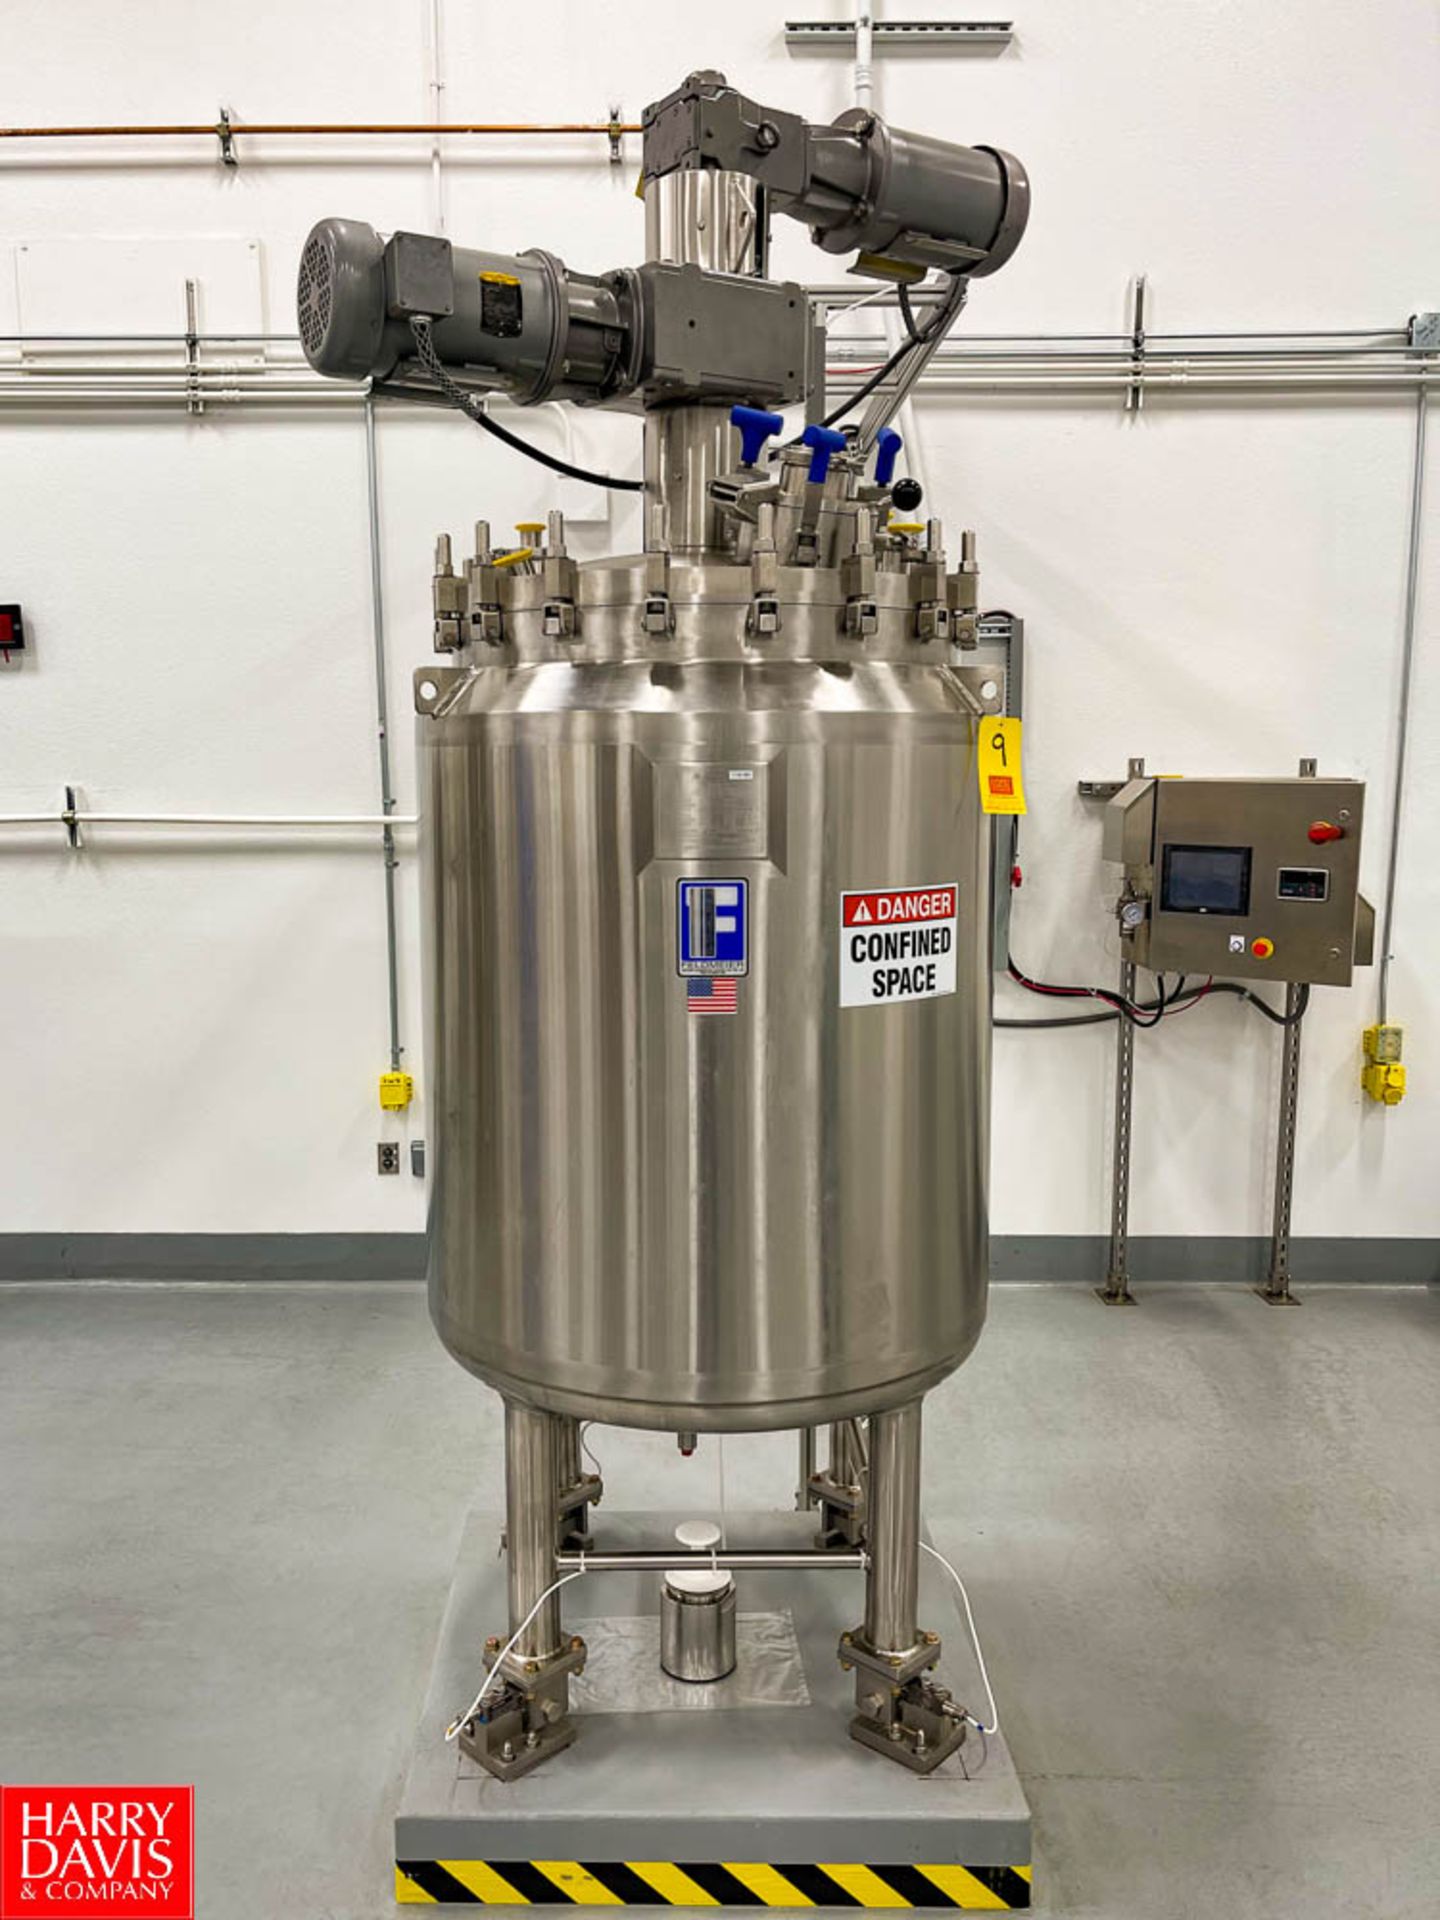 2019 Feldmeier 120 Gallon Vacuum-Jacketed Dome-Top 316L S/S Tank : SN 19EO437, Mounted on Load Cells - Image 4 of 10